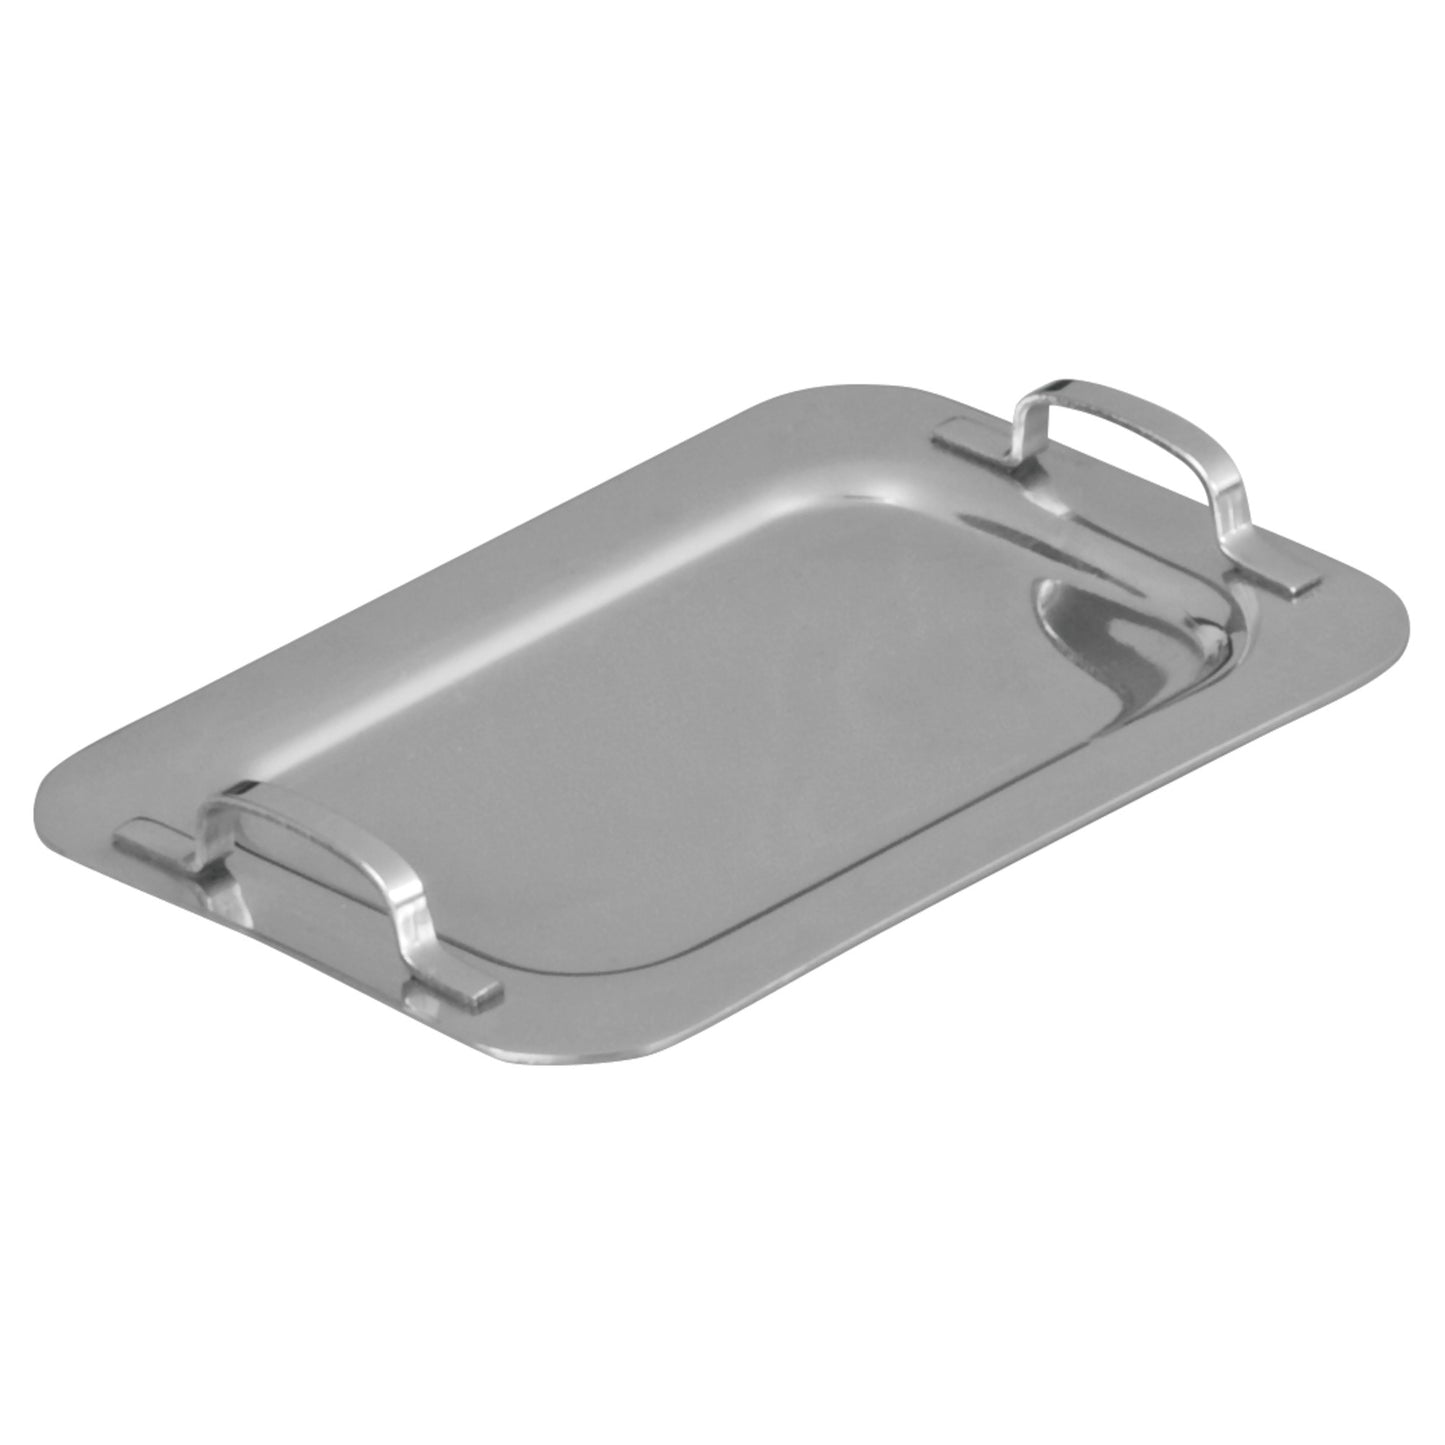 DDSH-101S - Mini Serving Platter with Handle, Stainless Steel - 6-5/8"